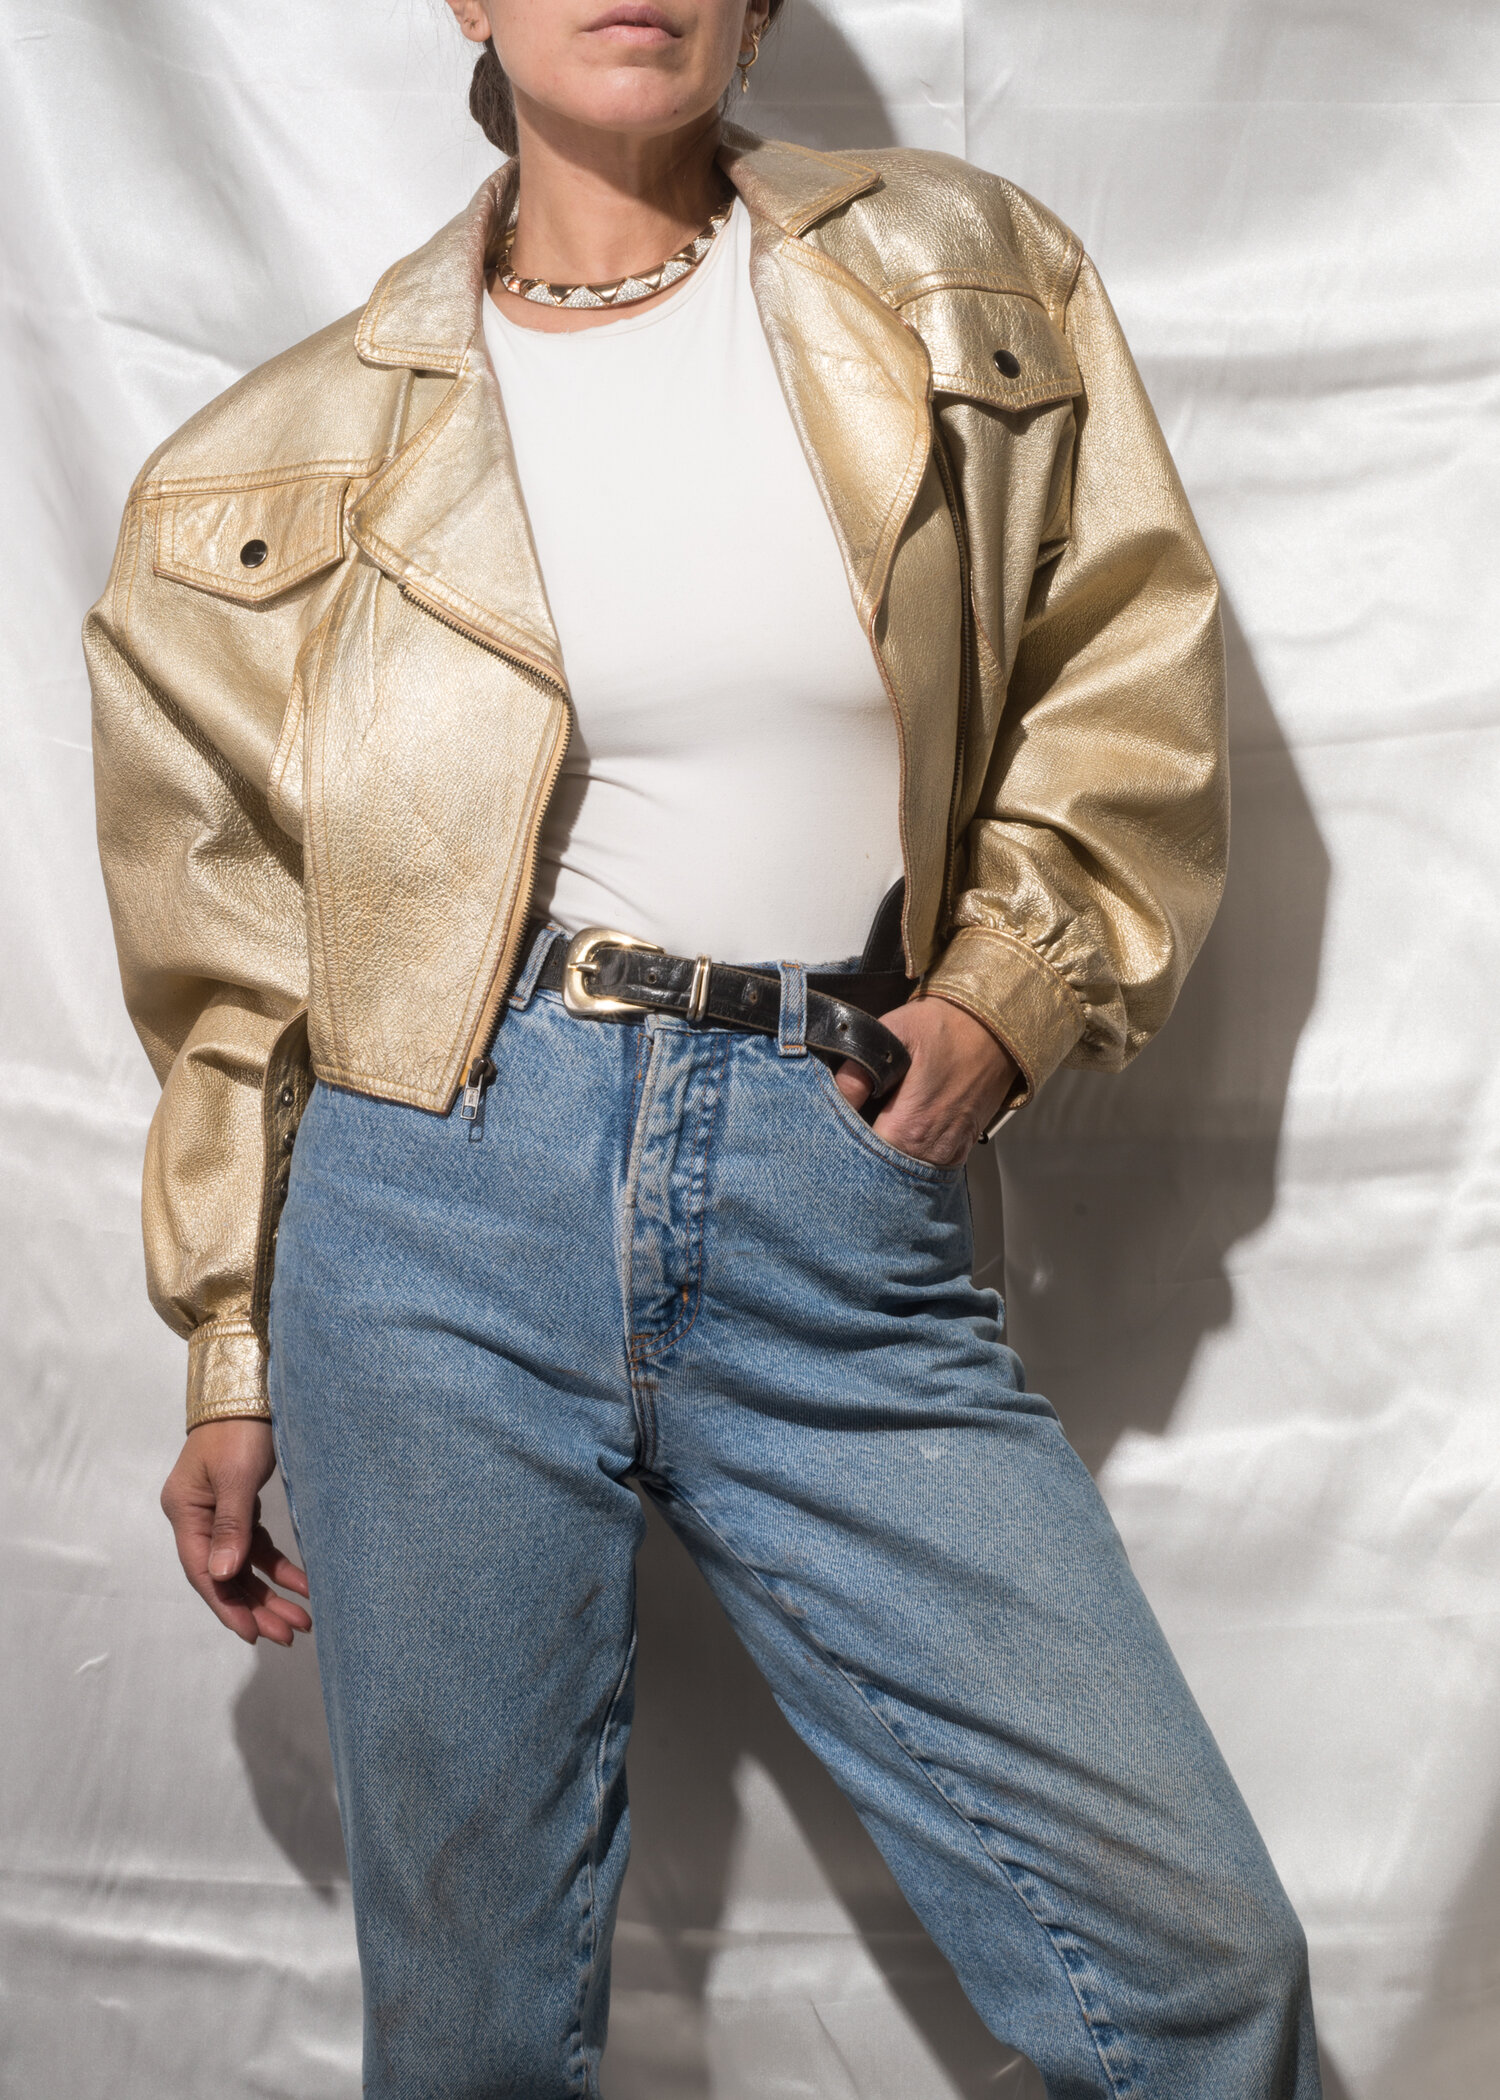 Details about  / Vintage 80s Contempo Casuals Cropped Moto Leather Jacket